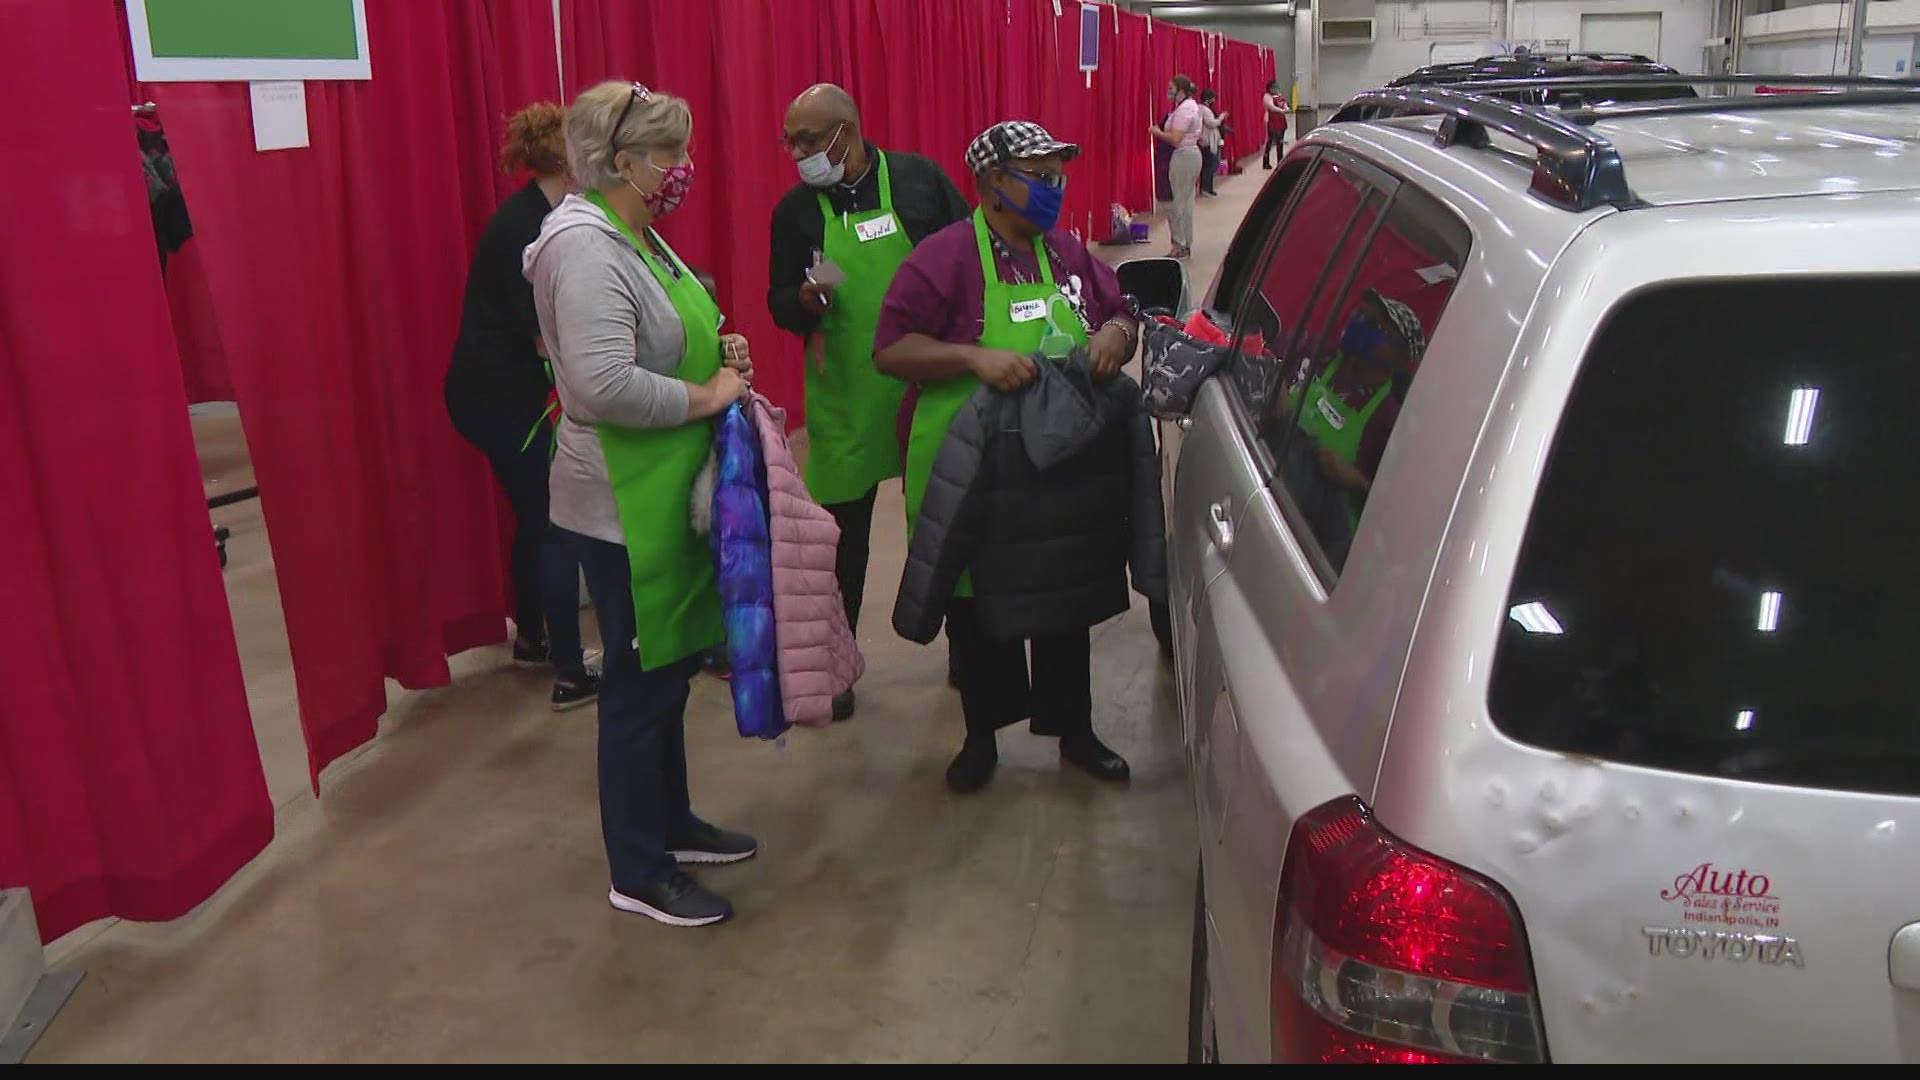 At least 1,800 kids have new winter coats after participating in Coats for Kids distribution day.